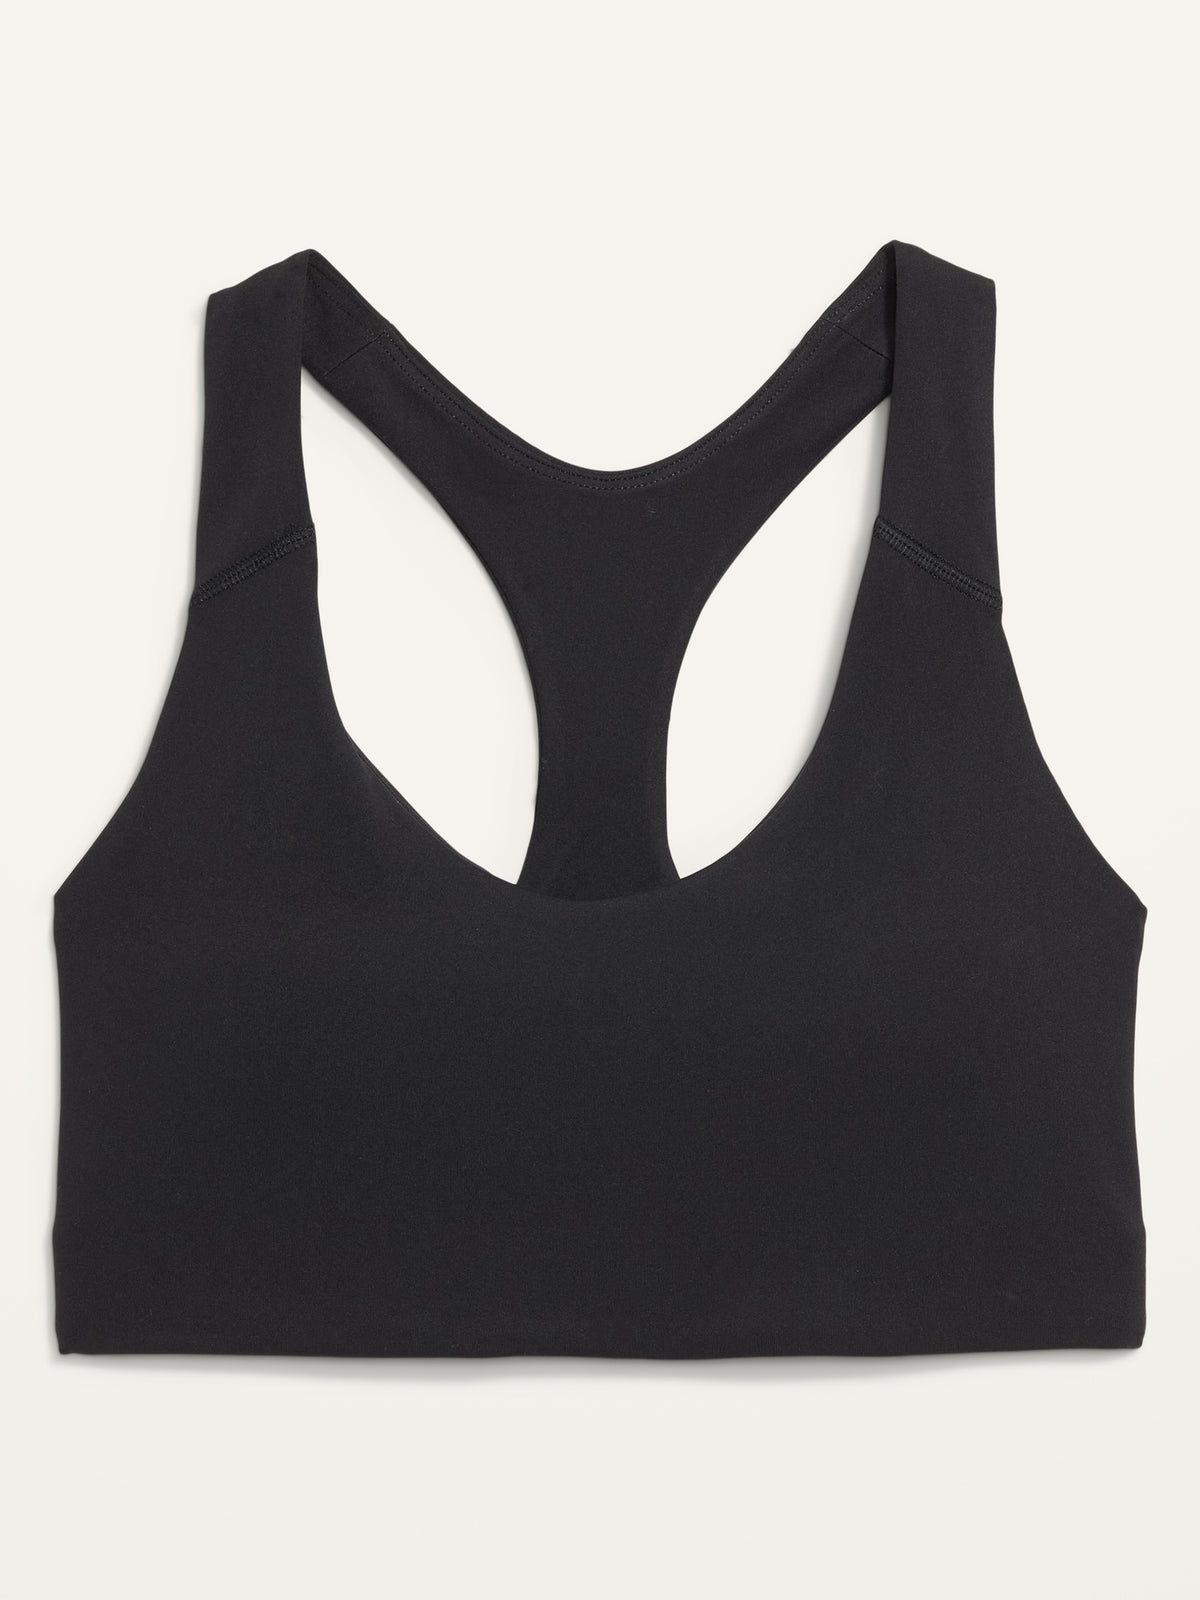 Bebe Sports Bra Gray Size XL - $30 (23% Off Retail) New With Tags - From  forever